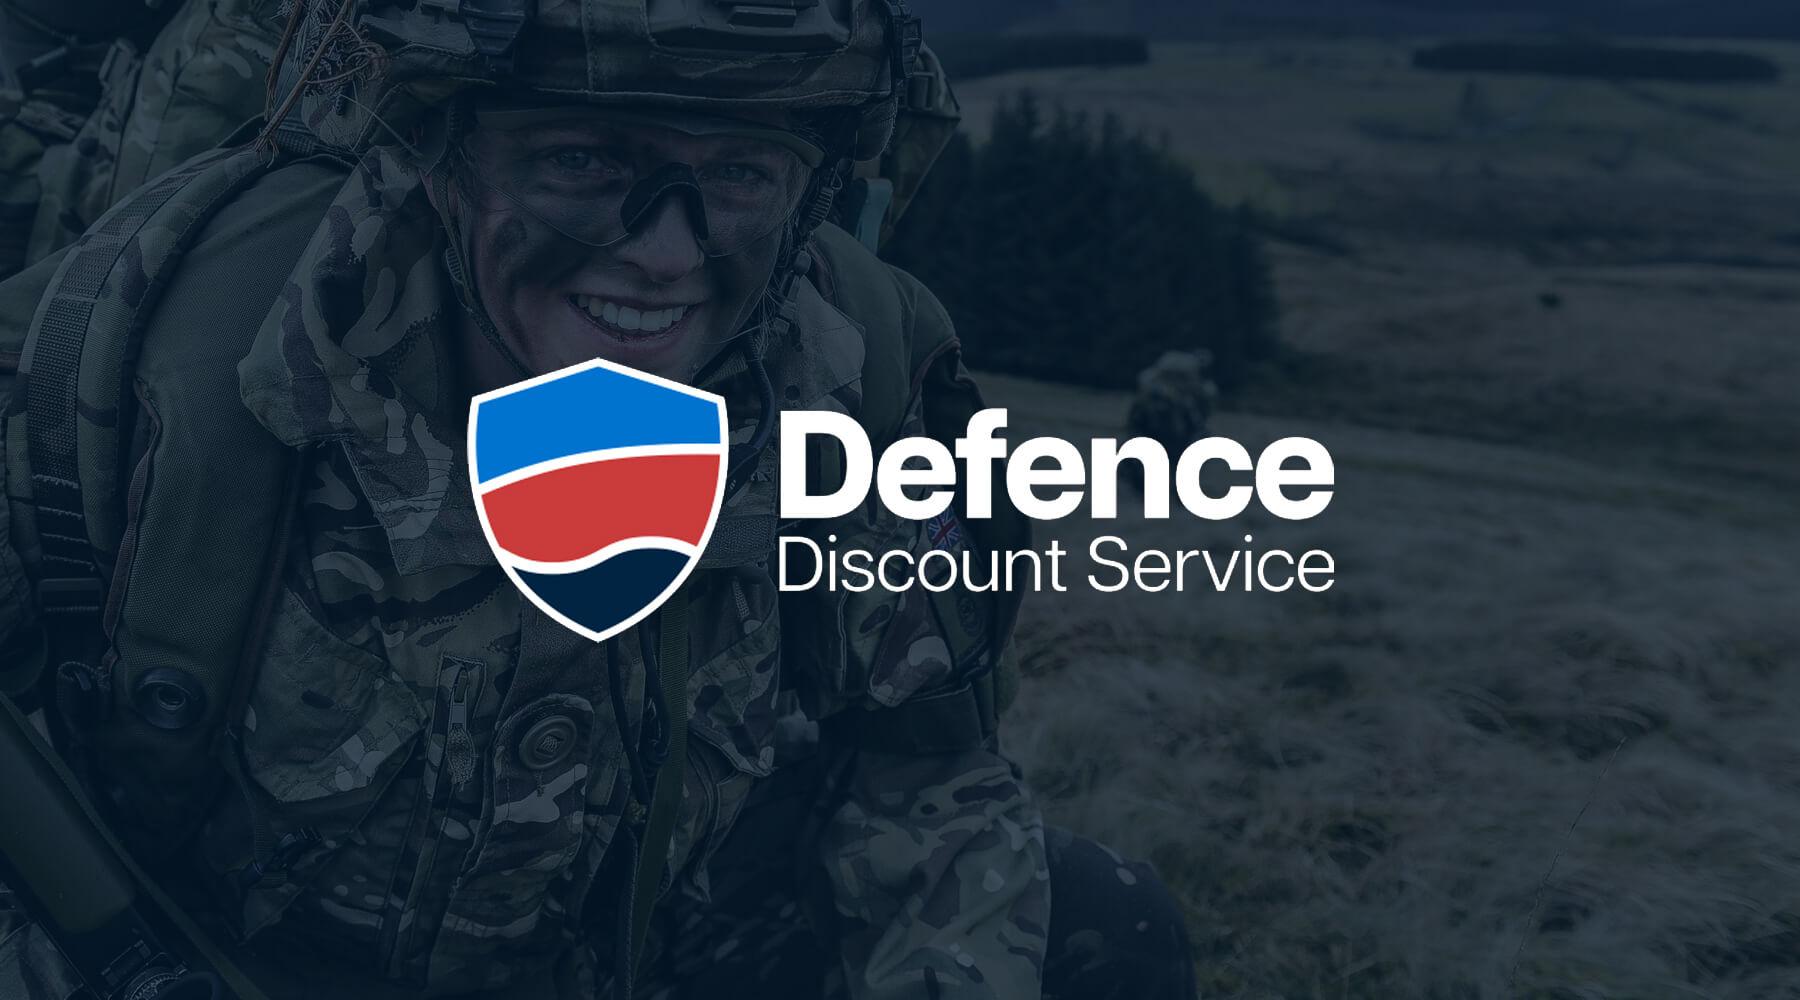 V3 Apparel partners with the Defence Discount Service to support British veterans and the armed forces community